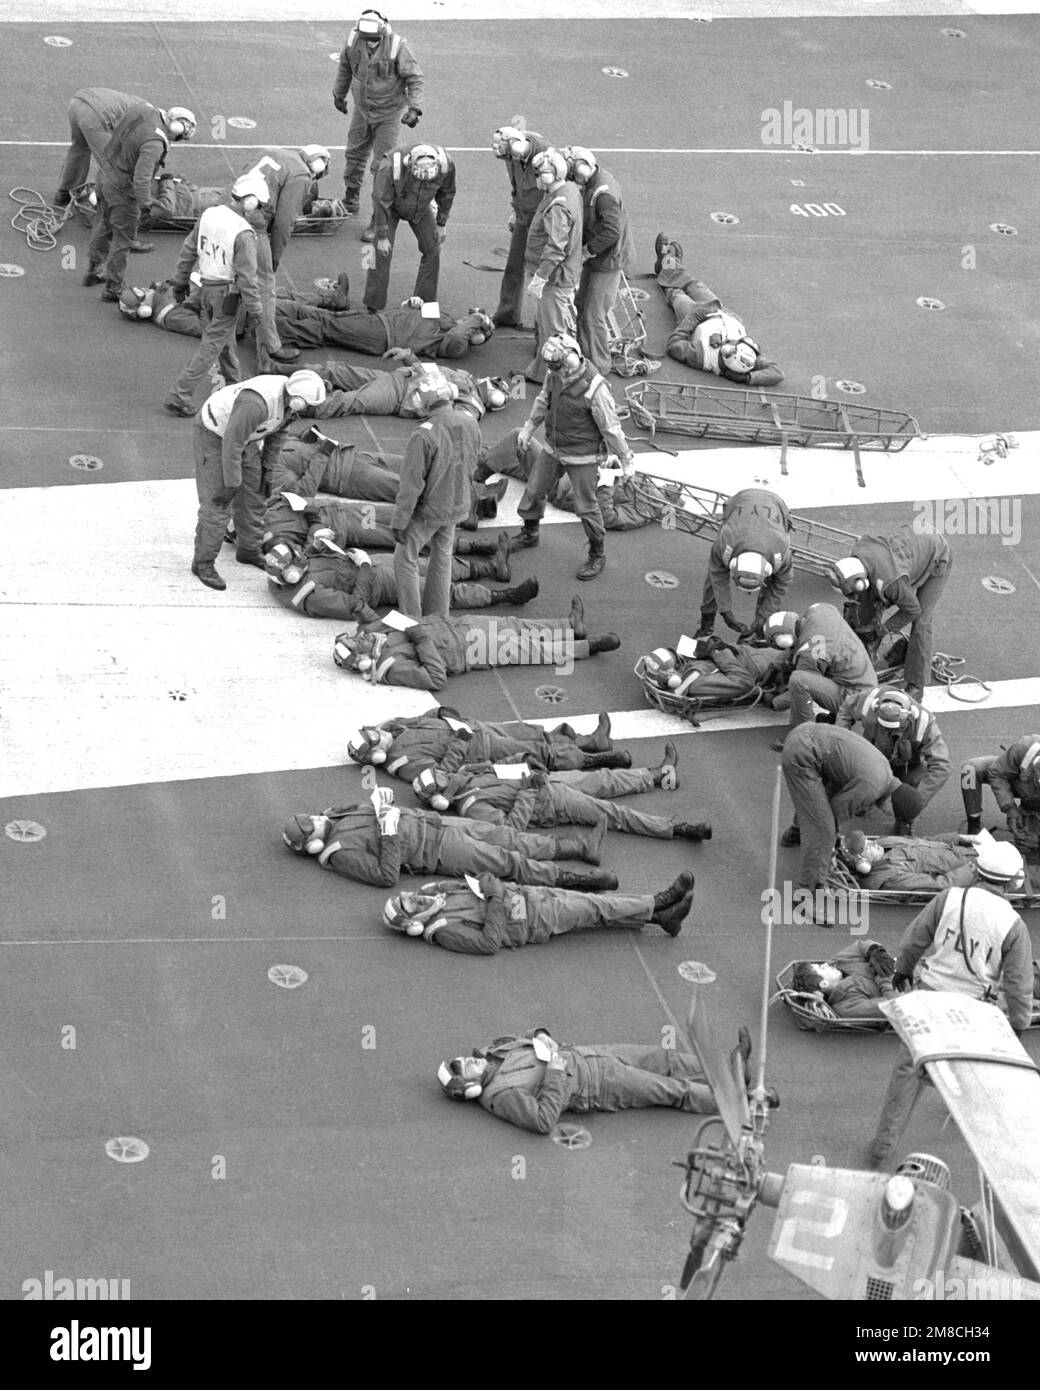 Crew members aboard the nuclear-powered aircraft carrier USS ABRAHAM LINCOLN (CVN-72) conduct a mass casualty drill. Country: Atlantic Ocean (AOC) Stock Photo